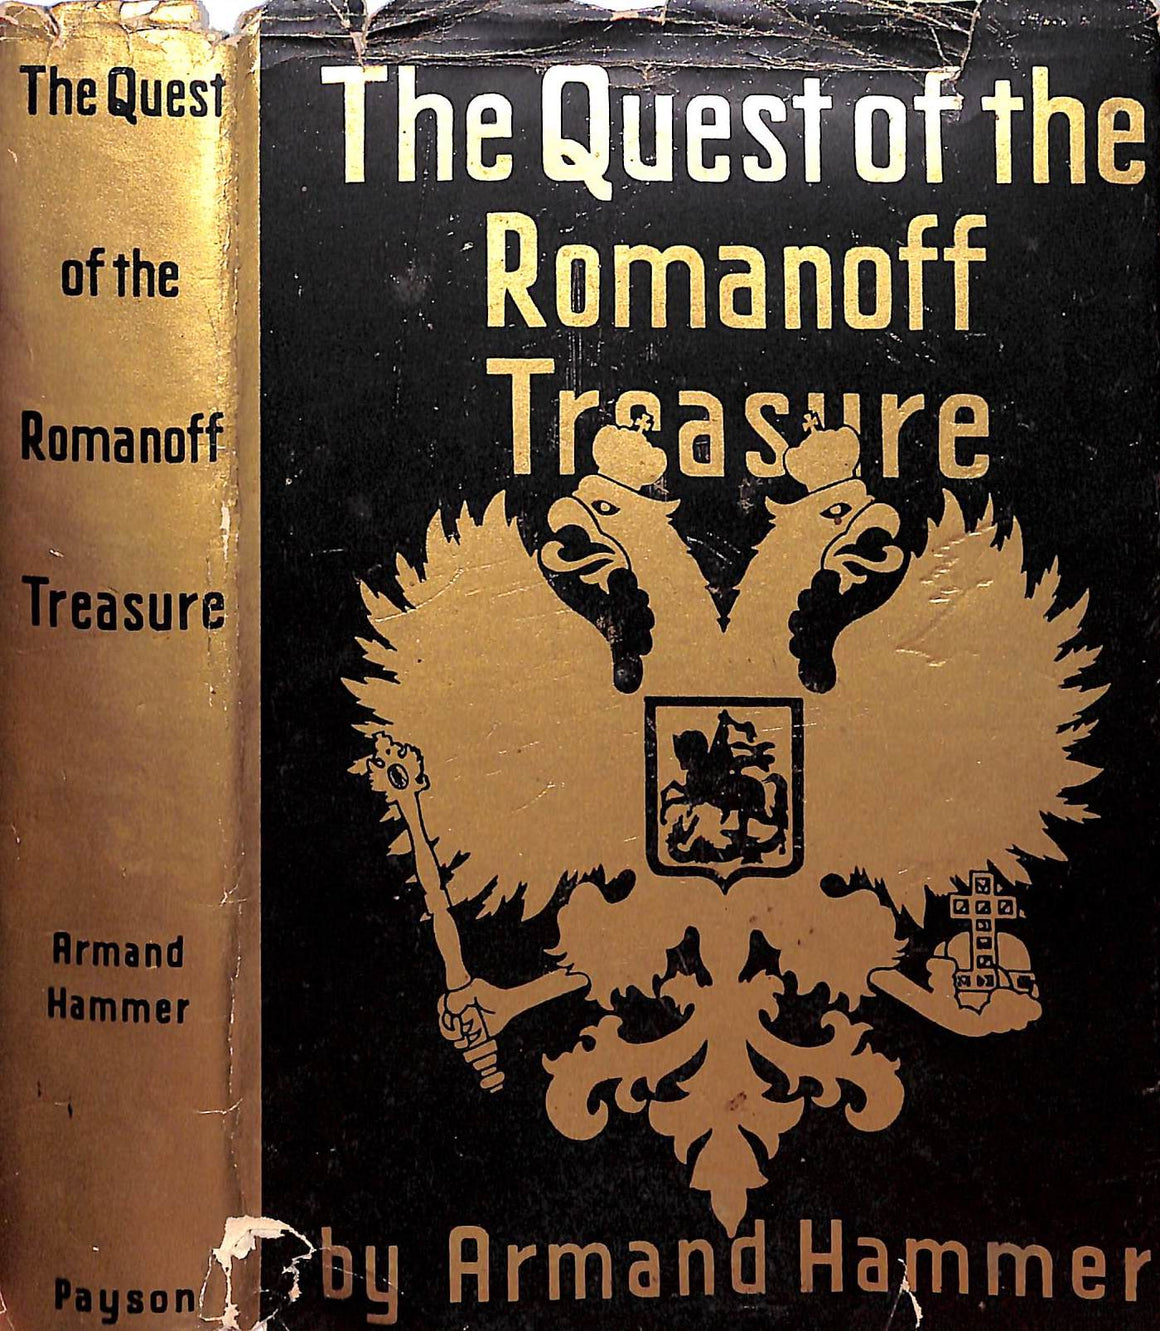 "The Quest Of The Romanoff Treasure" 1932 HAMMER, Armand (INSCRIBED) (SOLD)